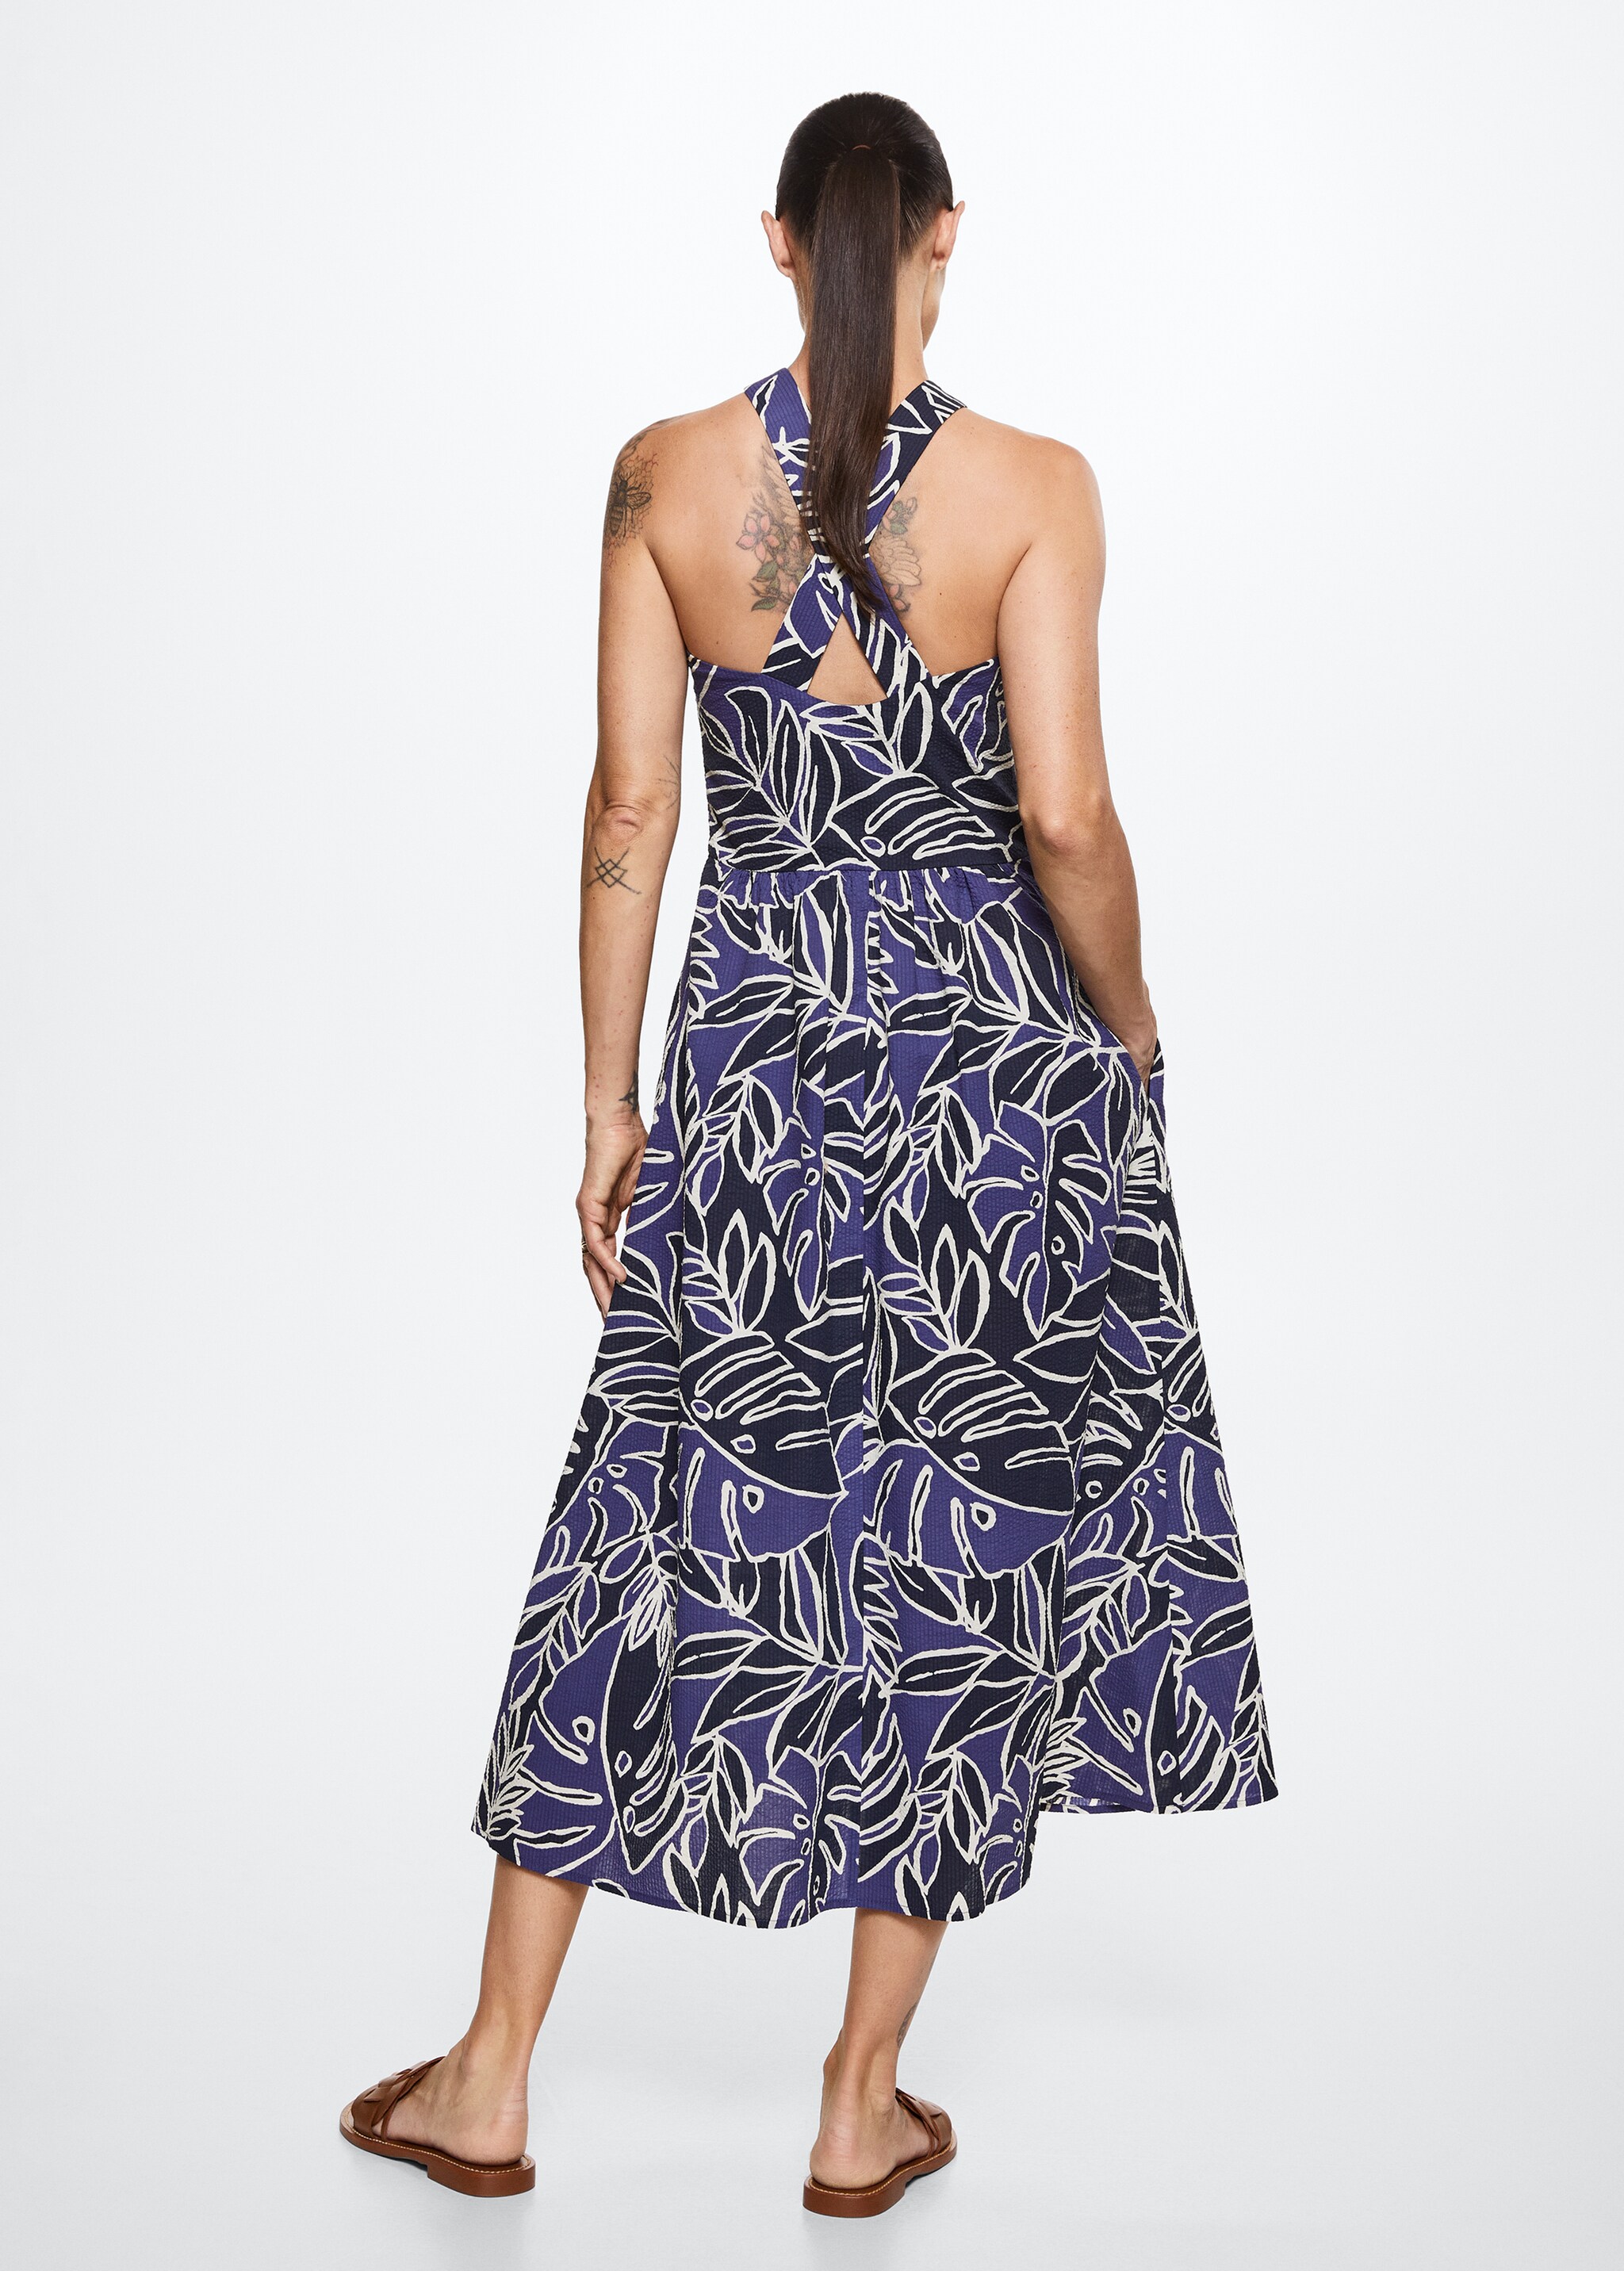 Printed cotton dress - Reverse of the article